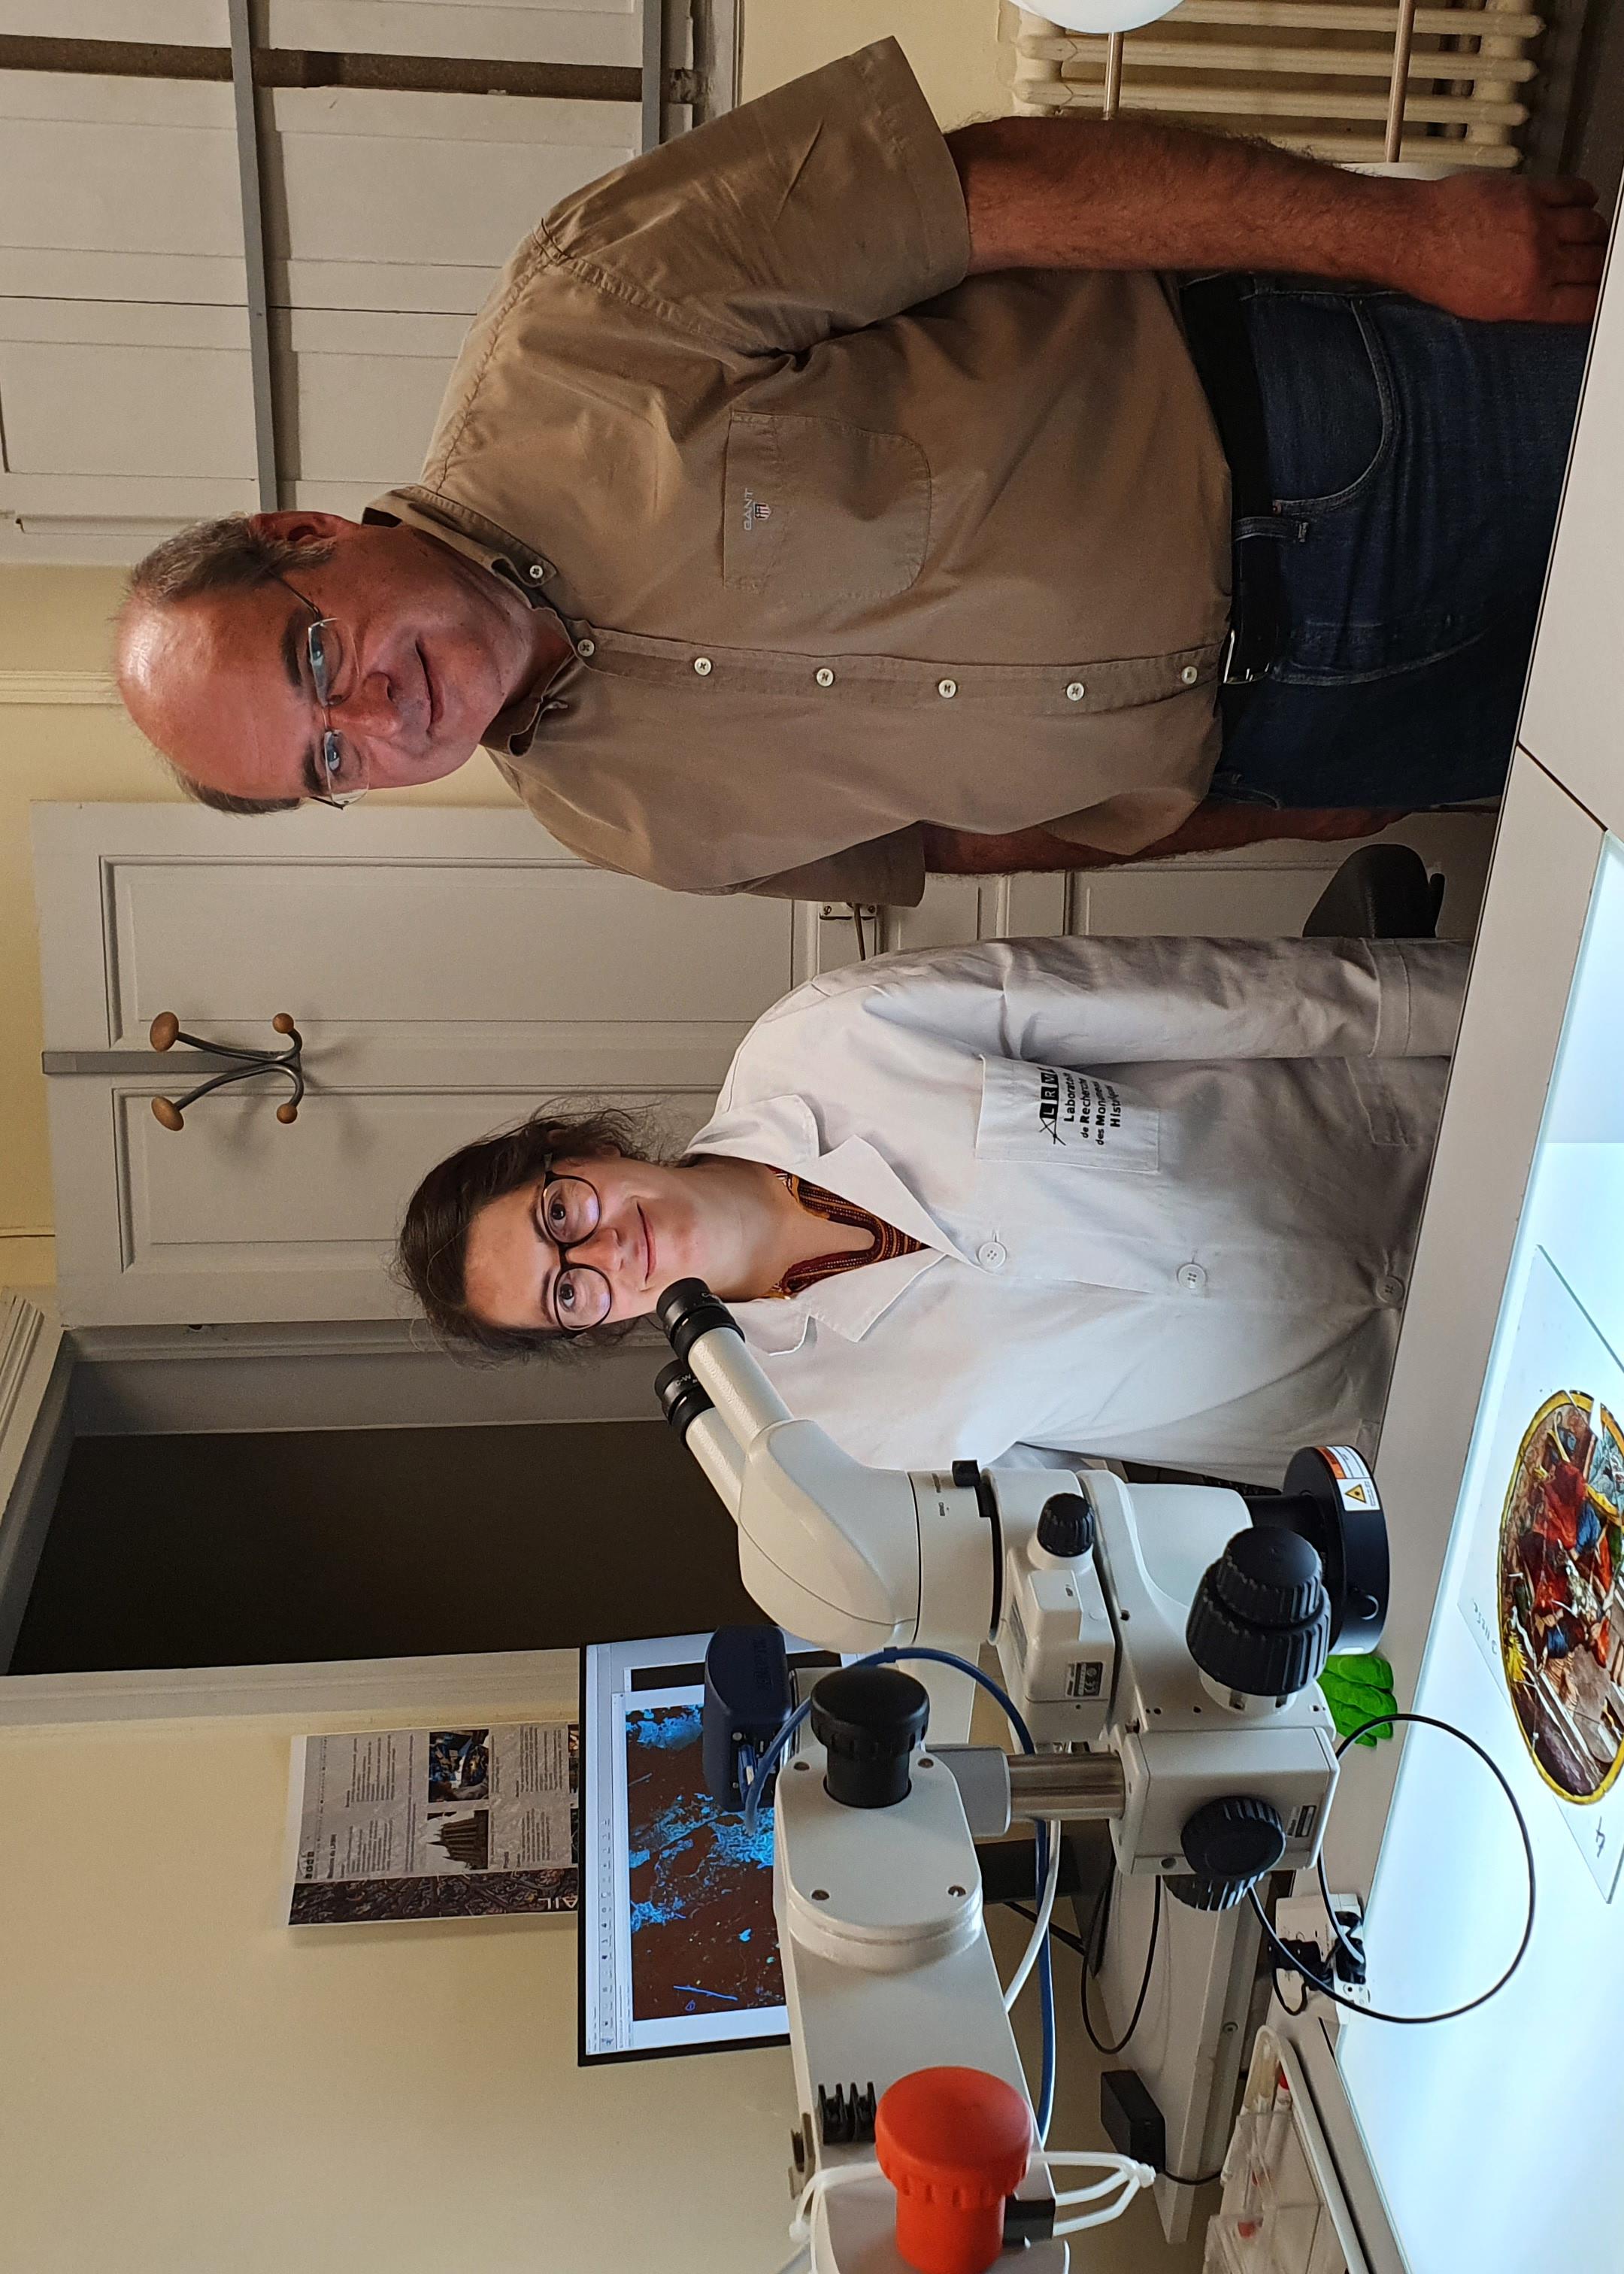 Barbara Trichereau, engineer at the LRMH, and Gilles Vaillant, Product Manager at Microvision, in front of a stained glass sample